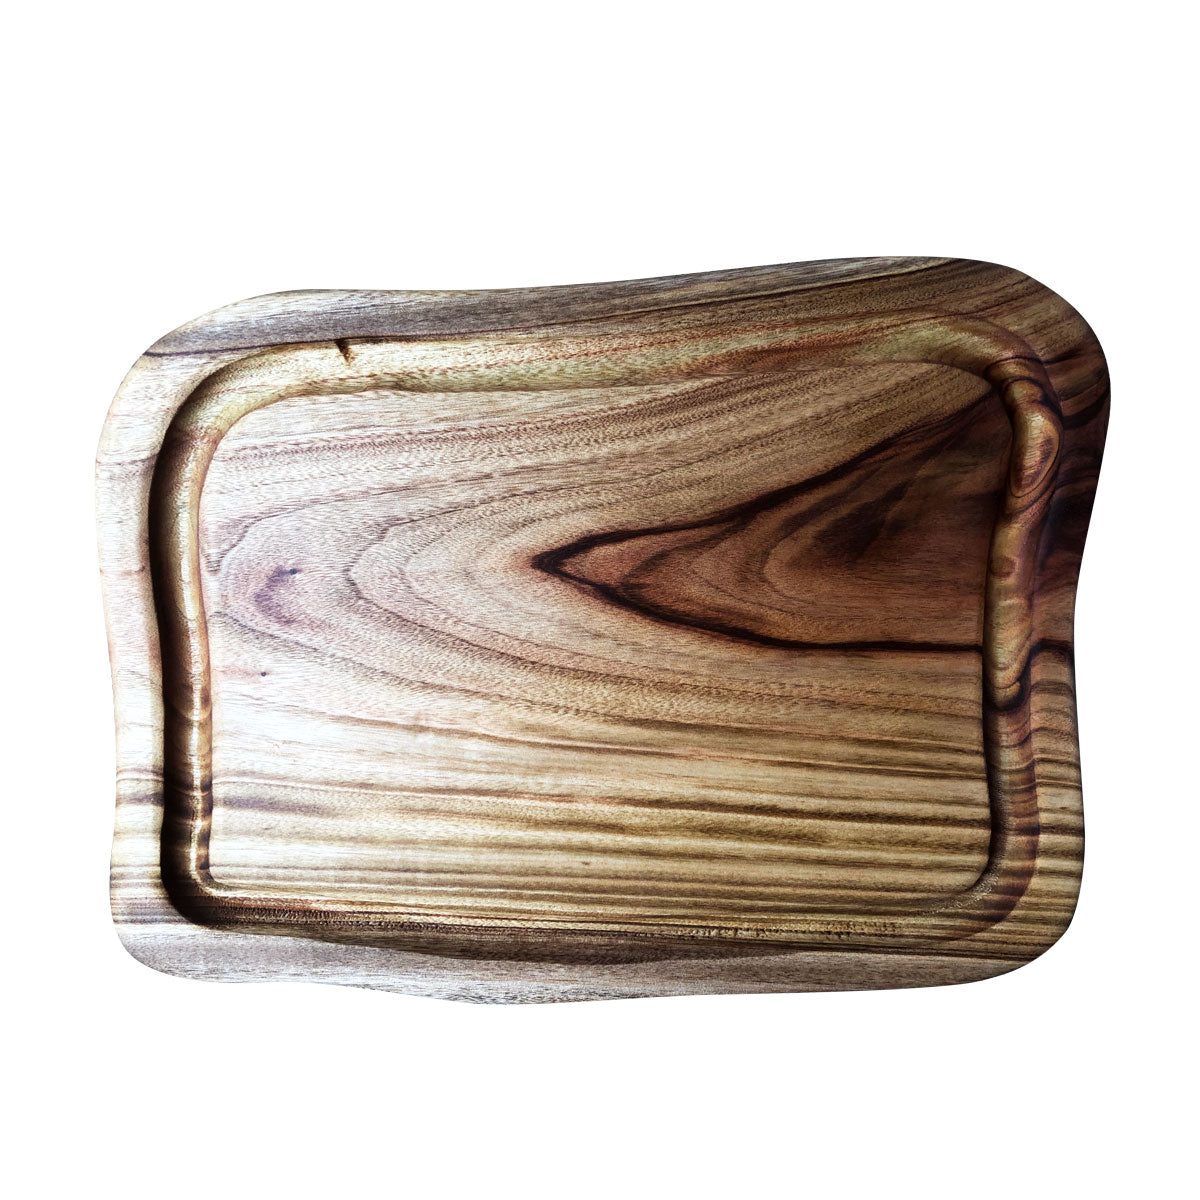 The medium size freeform, organic shaped wooden carving board with a deep groove or juice rail designed by Nature's Boards with camphor laurel timber that's naturally antibacterial.